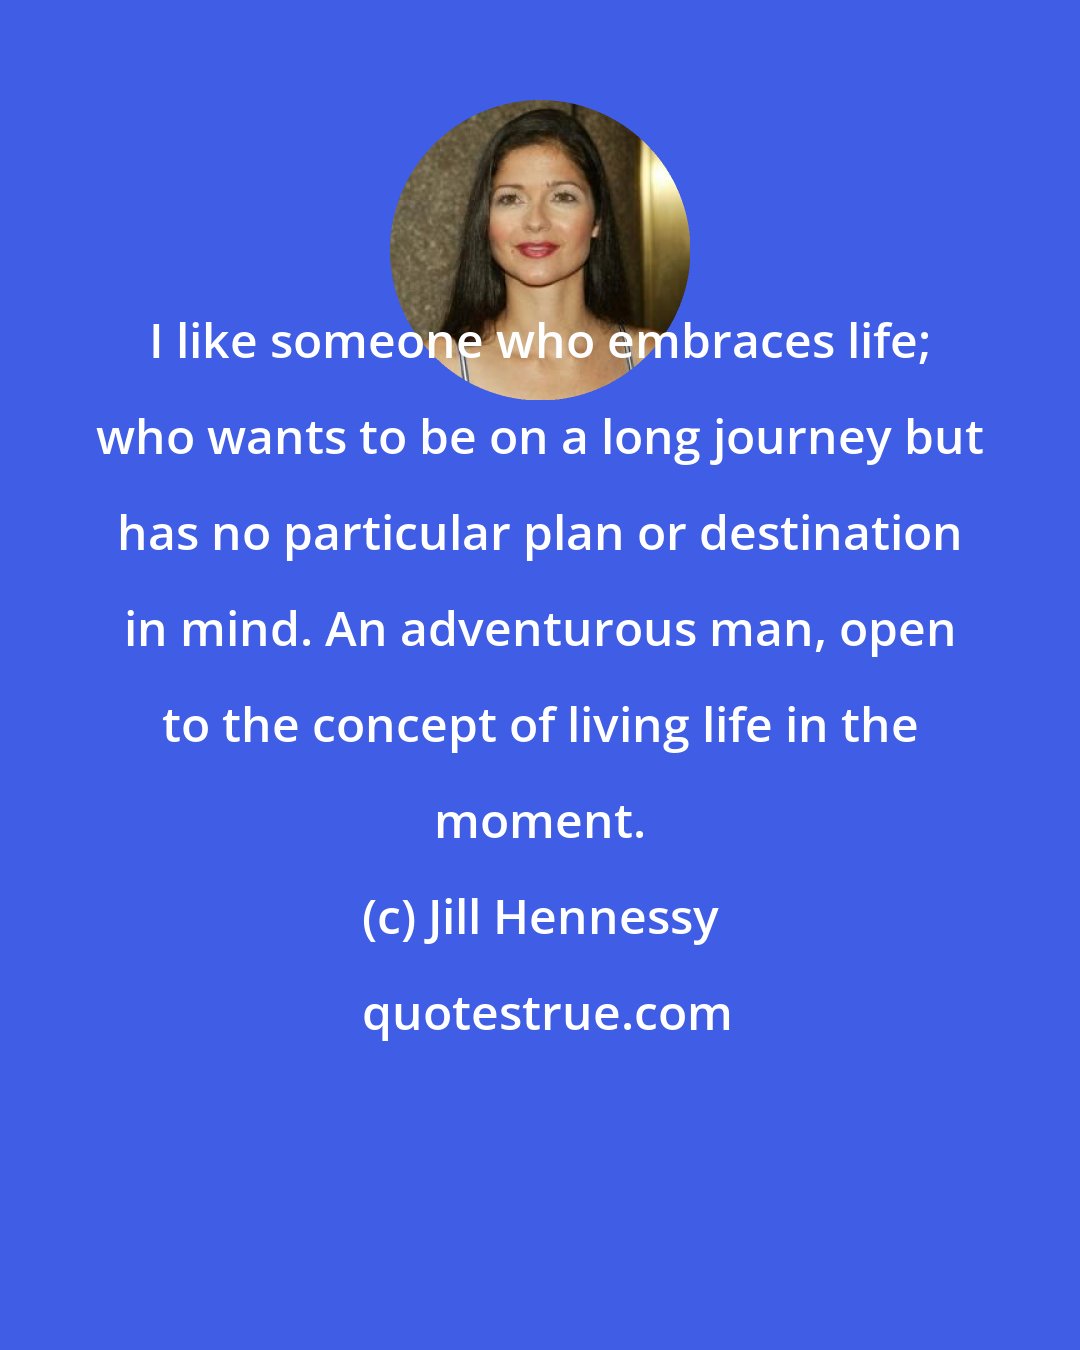 Jill Hennessy: I like someone who embraces life; who wants to be on a long journey but has no particular plan or destination in mind. An adventurous man, open to the concept of living life in the moment.